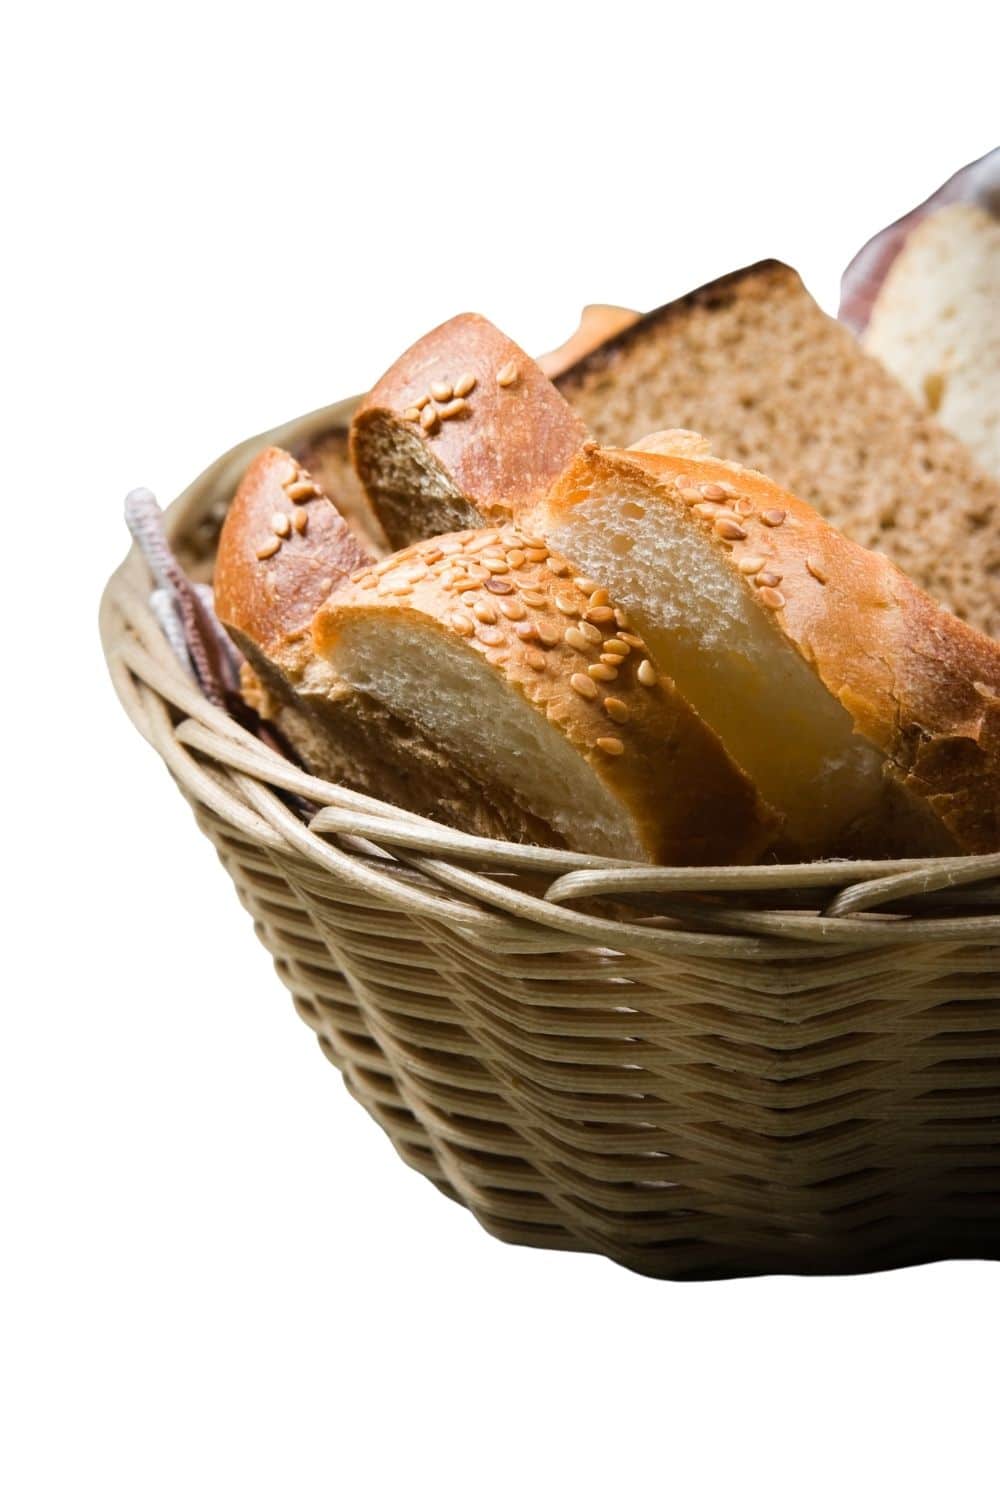 bread baking supplies article showing bread in a basket